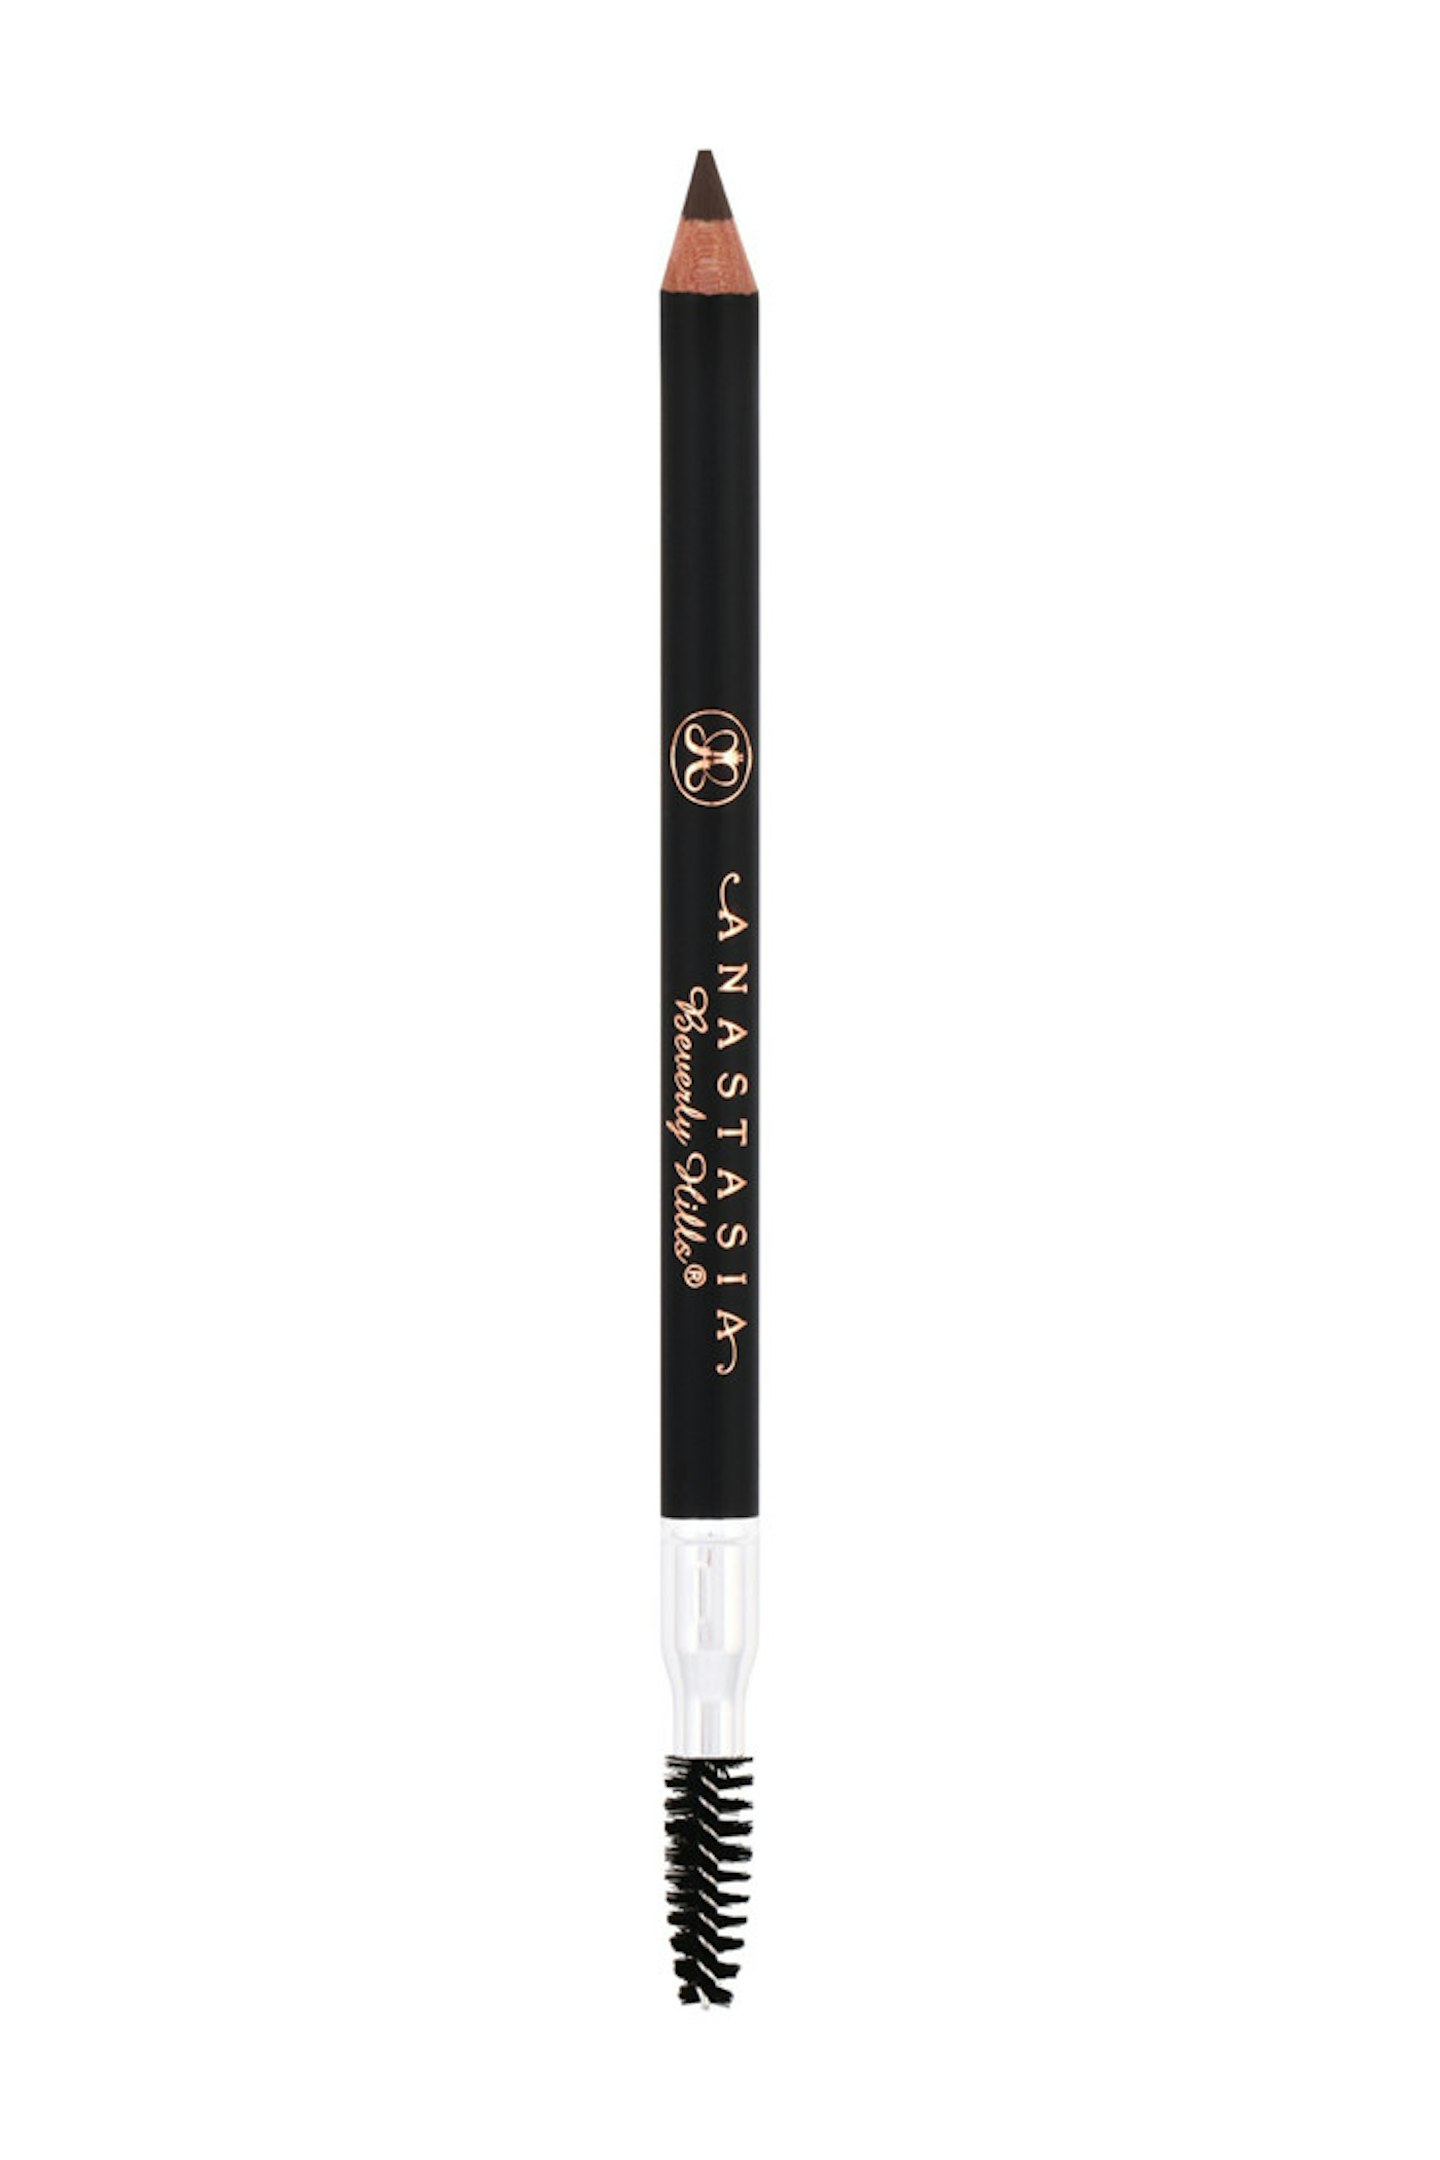 Anastasia Beverly Hills Perfect Brow Pencil, £18.00